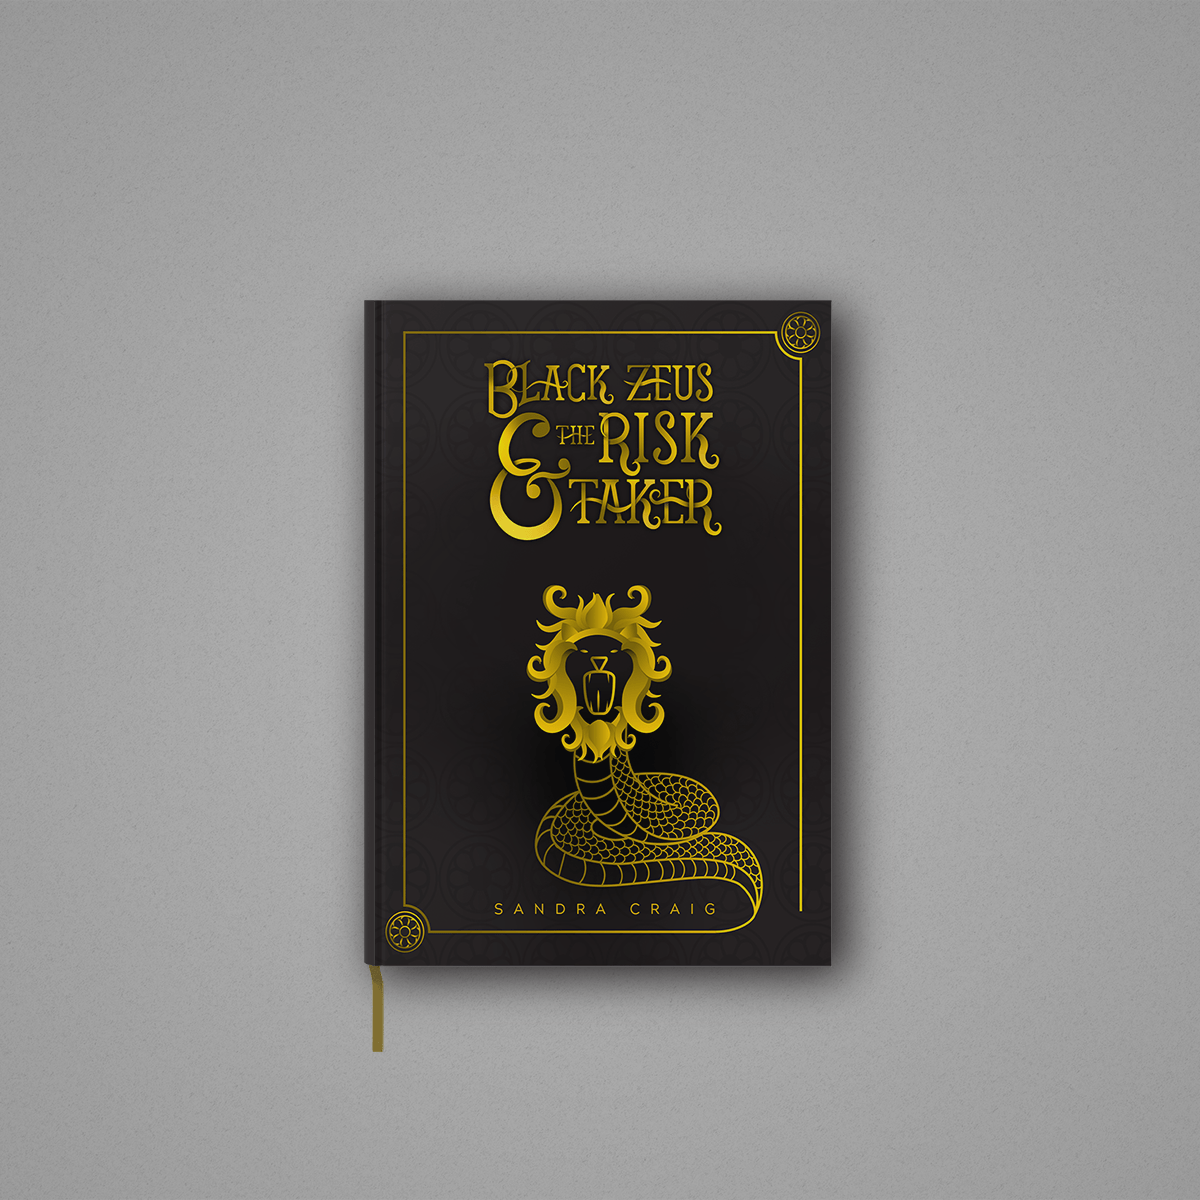 Black Zeus and the Risk Taker book mockup